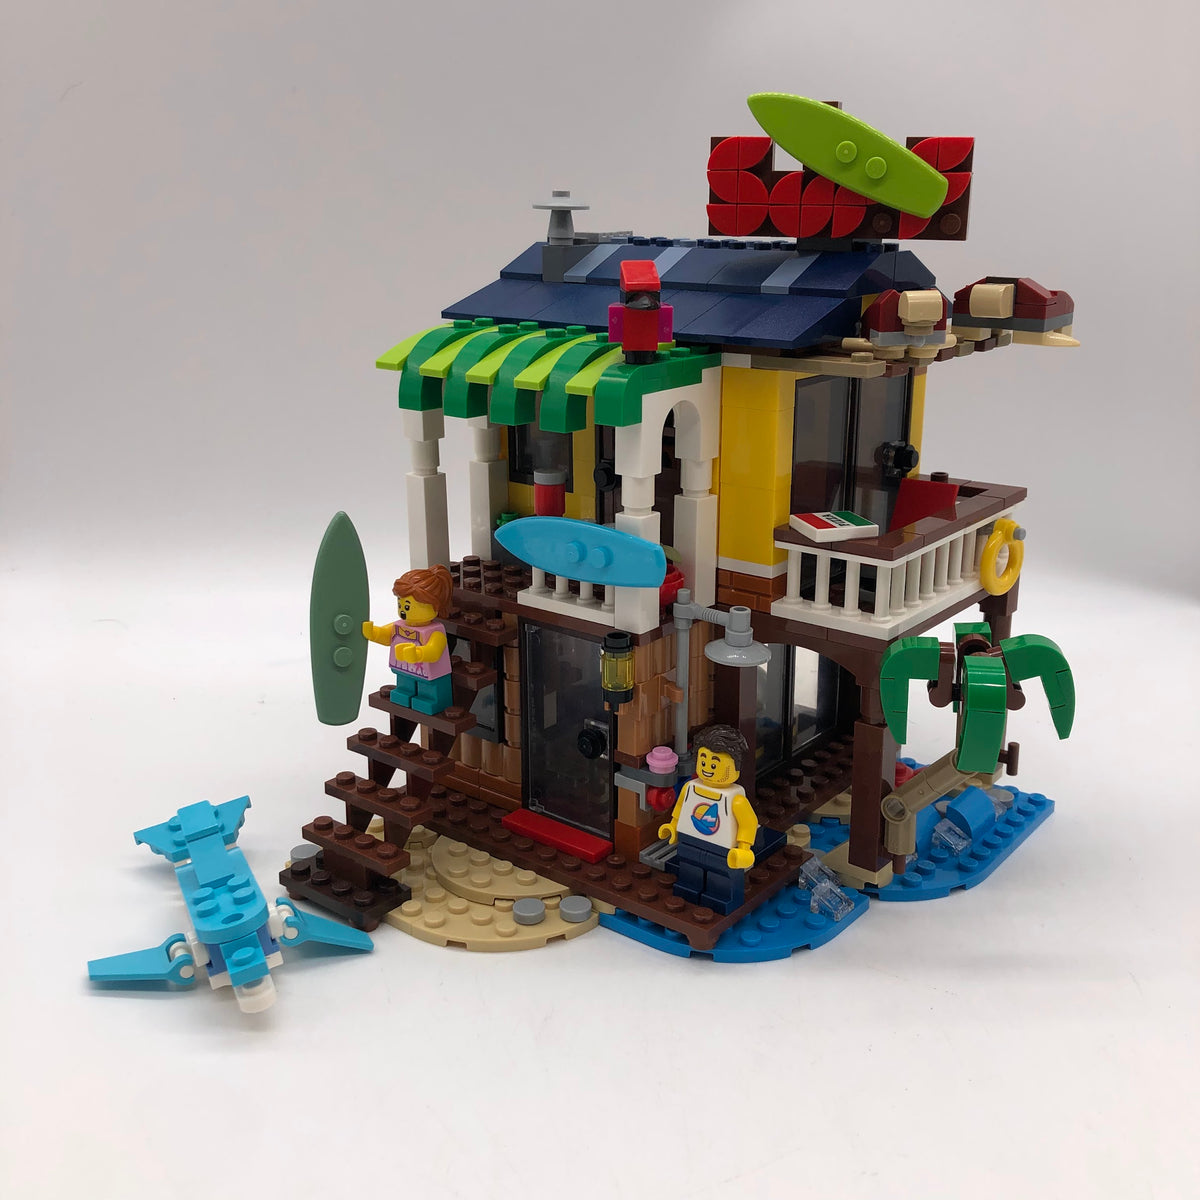 LEGO Creator 3-in-1: Surfer Beach House – Awesome Toys Gifts